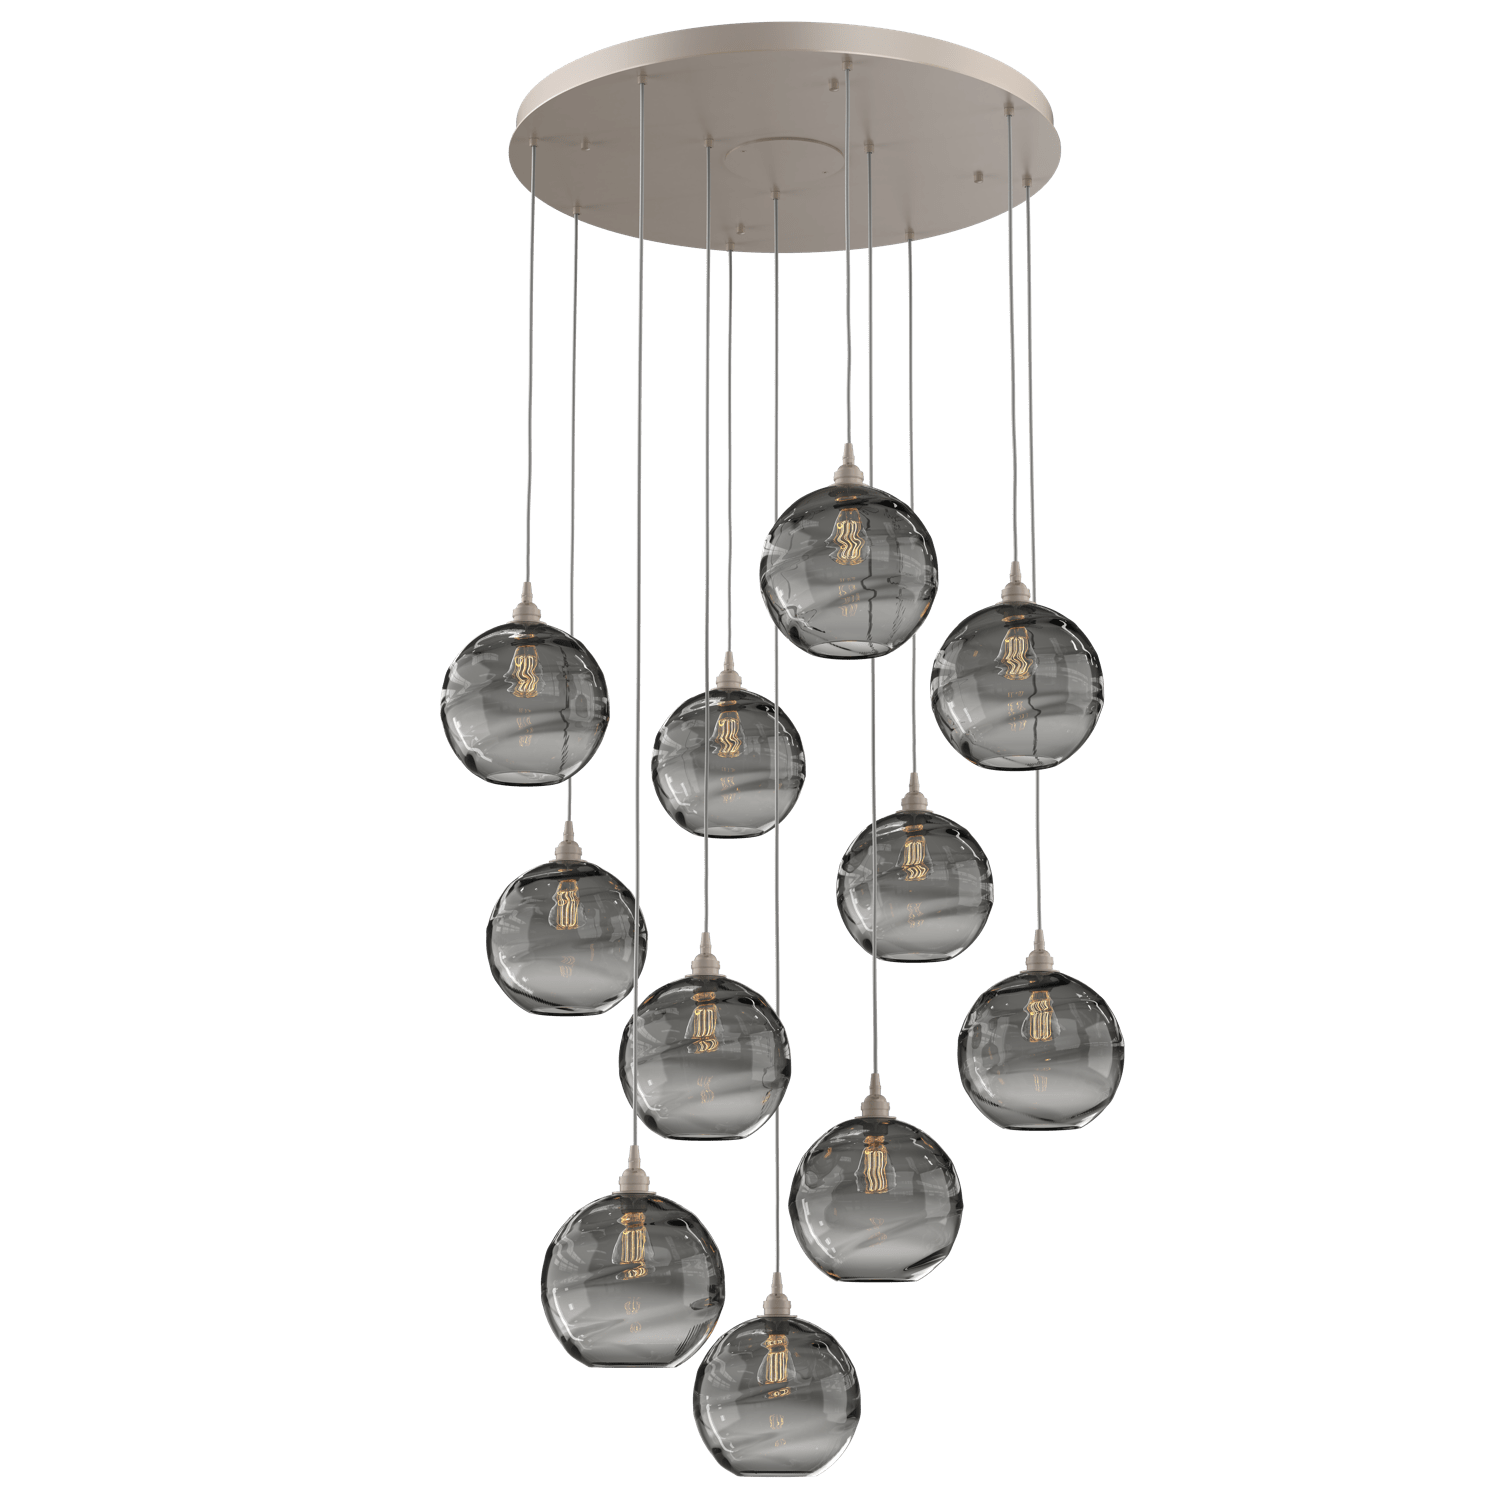 CHB0047-11-BS-OS-Hammerton-Studio-Optic-Blown-Glass-Terra-11-light-round-pendant-chandelier-with-metallic-beige-silver-finish-and-optic-smoke-blown-glass-shades-and-incandescent-lamping